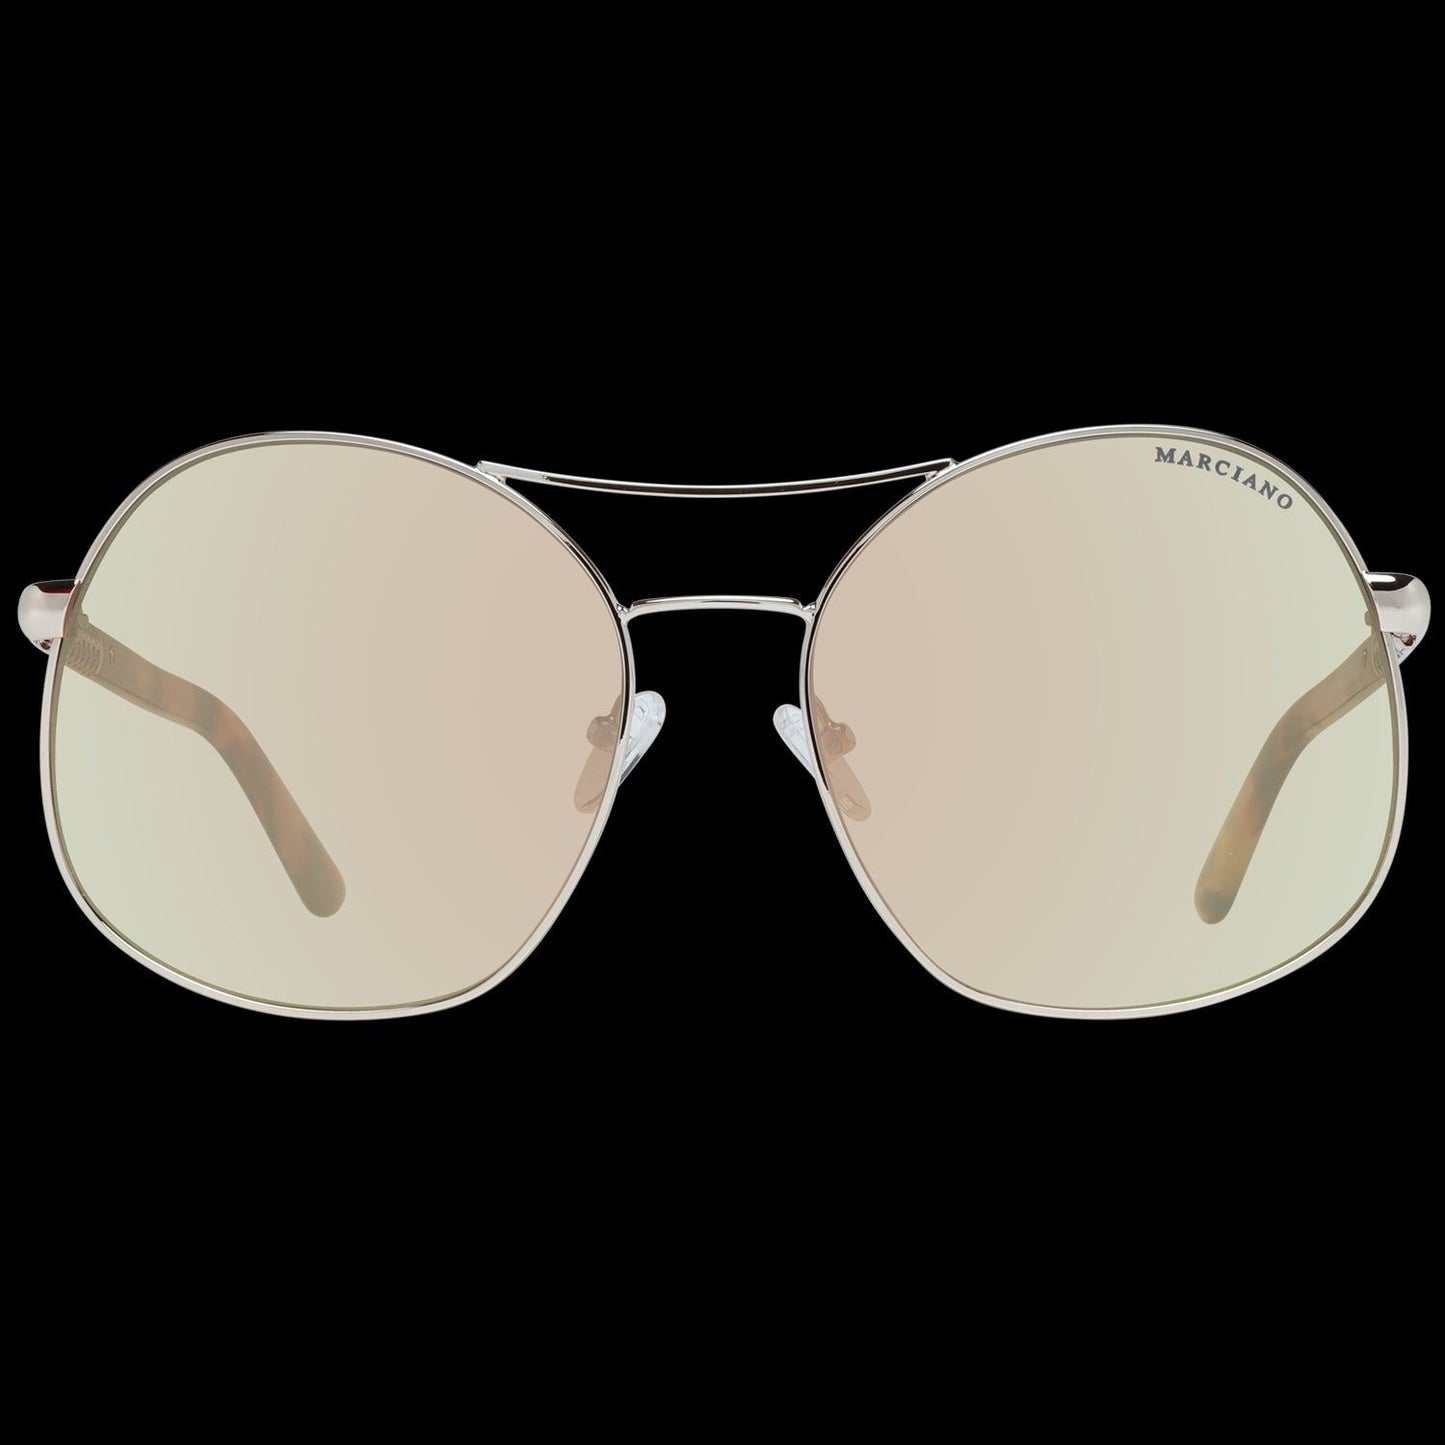 MARCIANO By GUESS SUNGLASSESMARCIANO BY GUESS MOD. GM0807 6232BMcRichard Designer Brands£118.00